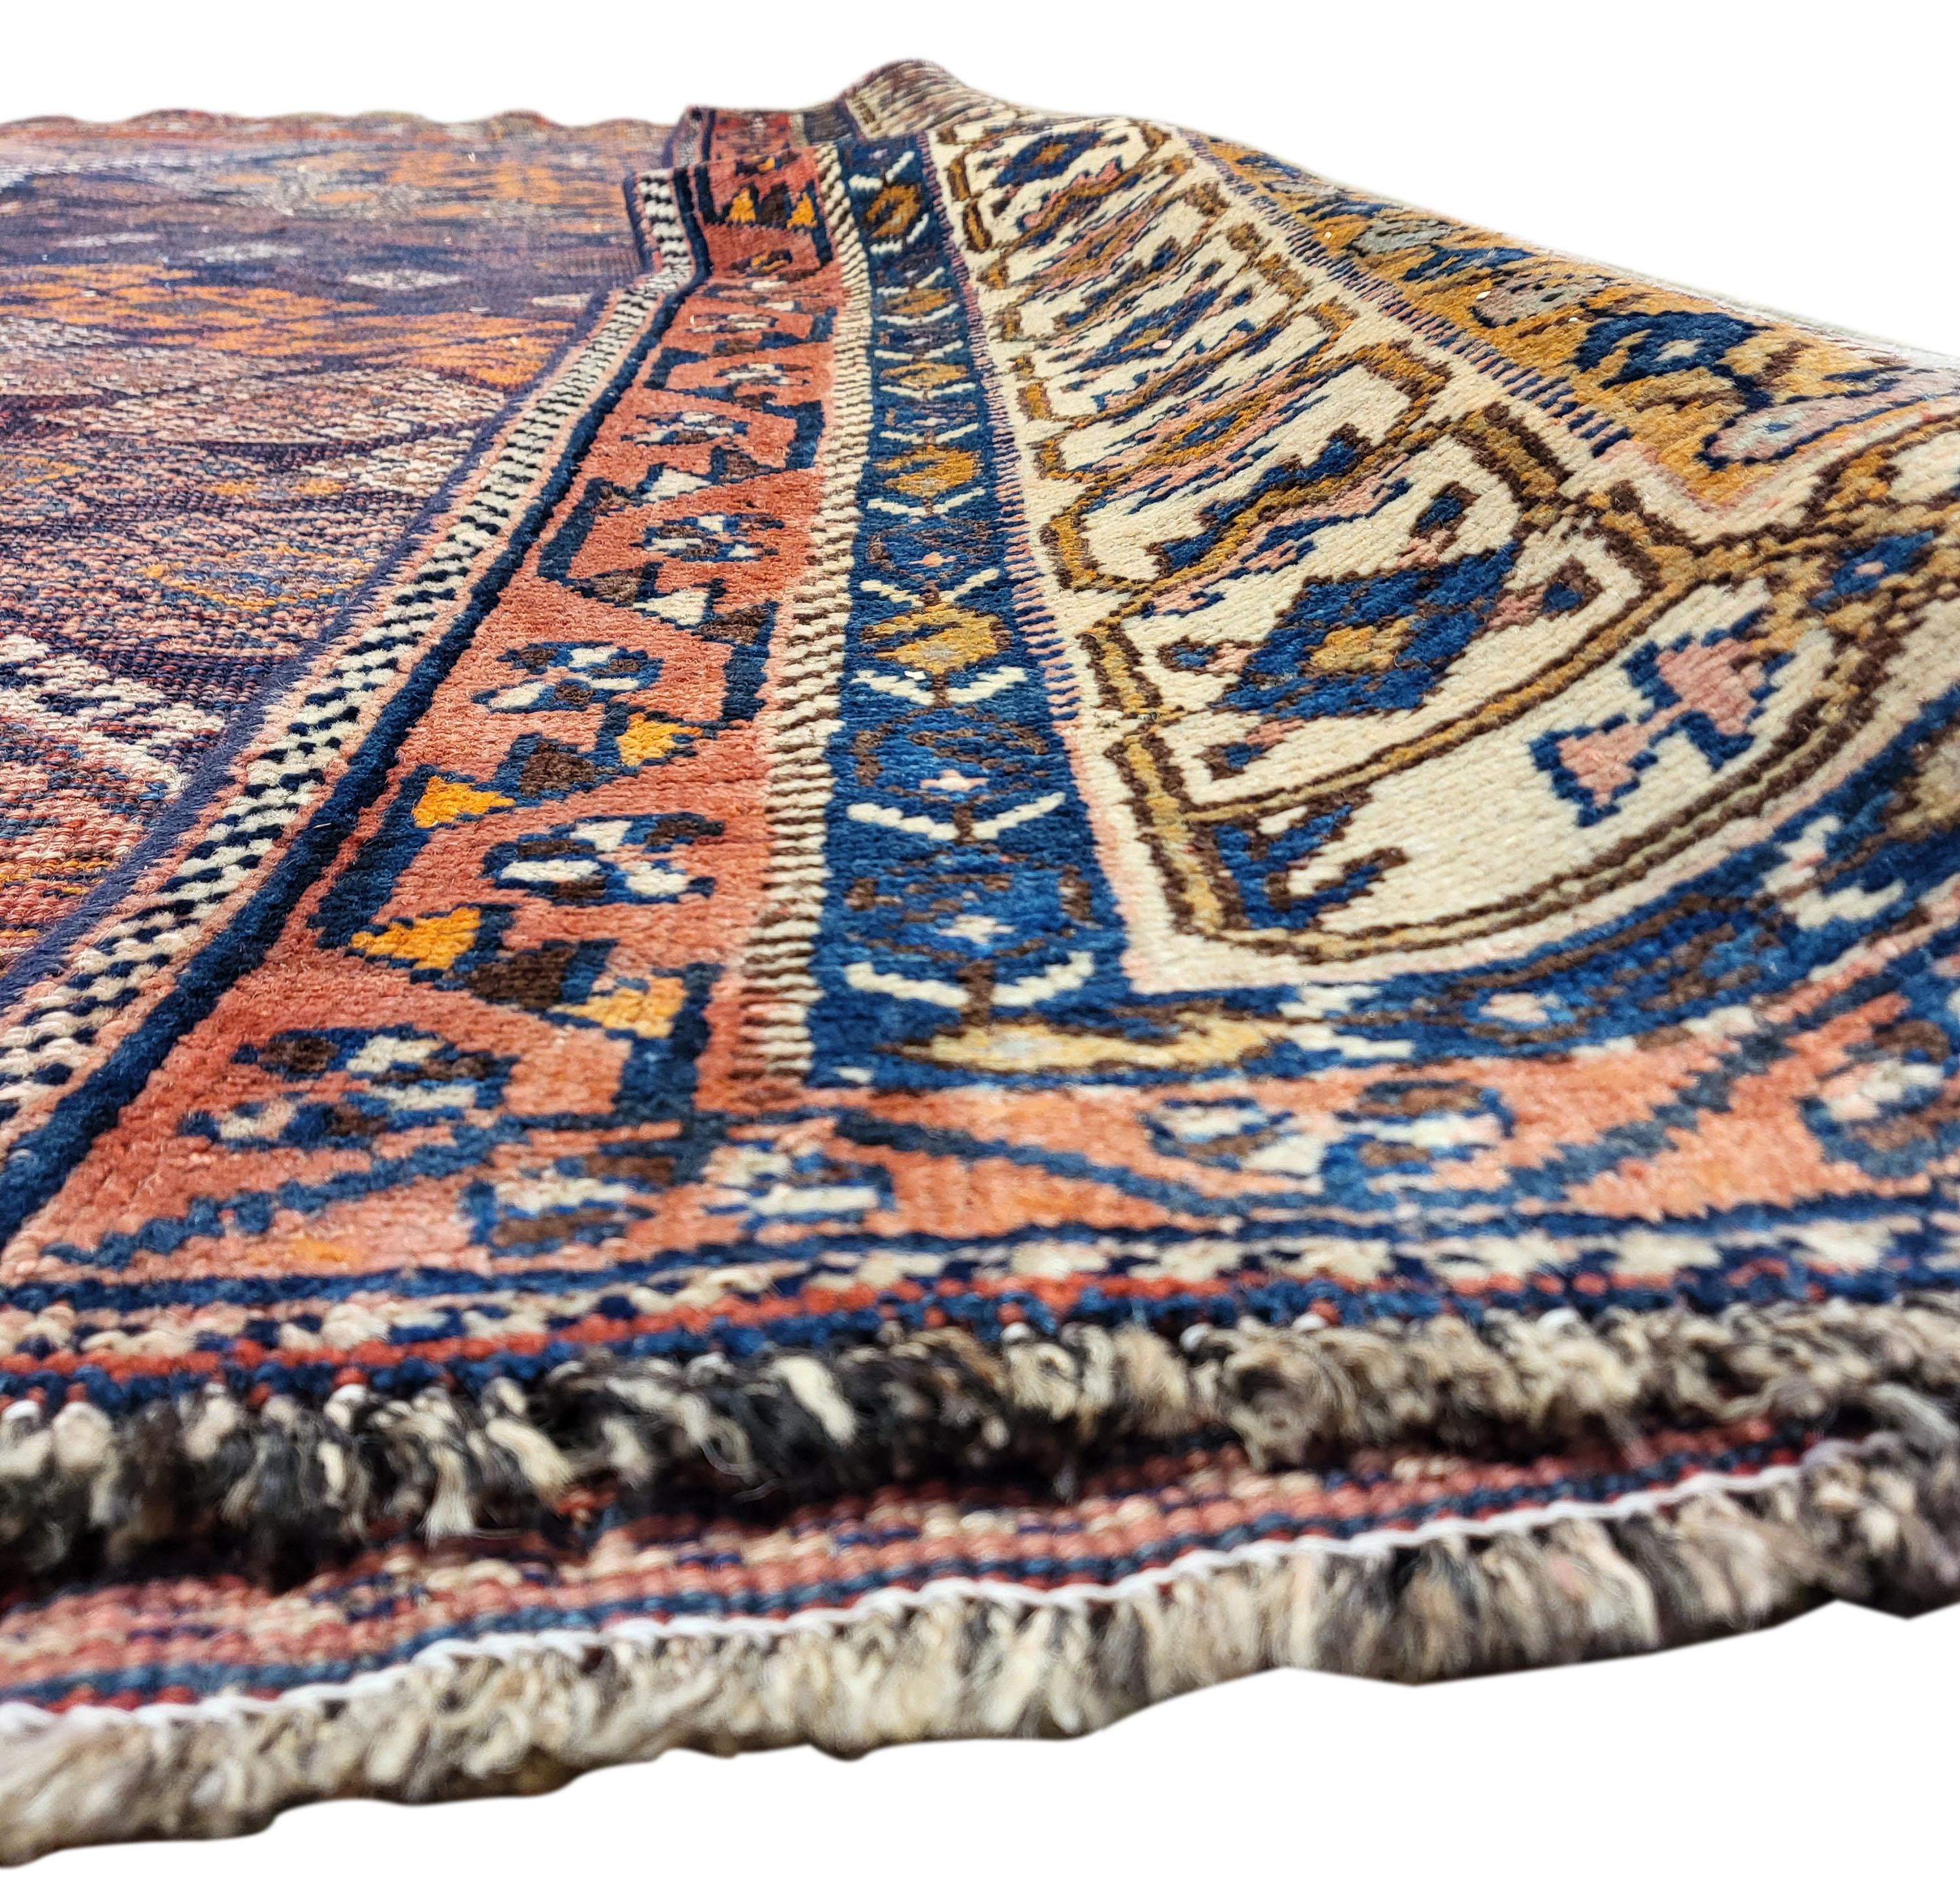 Magnificent 1930's Persian Lori. For nearly a century this rug's beauty has stood the test of time! The beautiful rusty tones enhanced by the navy foreground of this rug are incredibly sought after. Featuring a versatile tribal design that